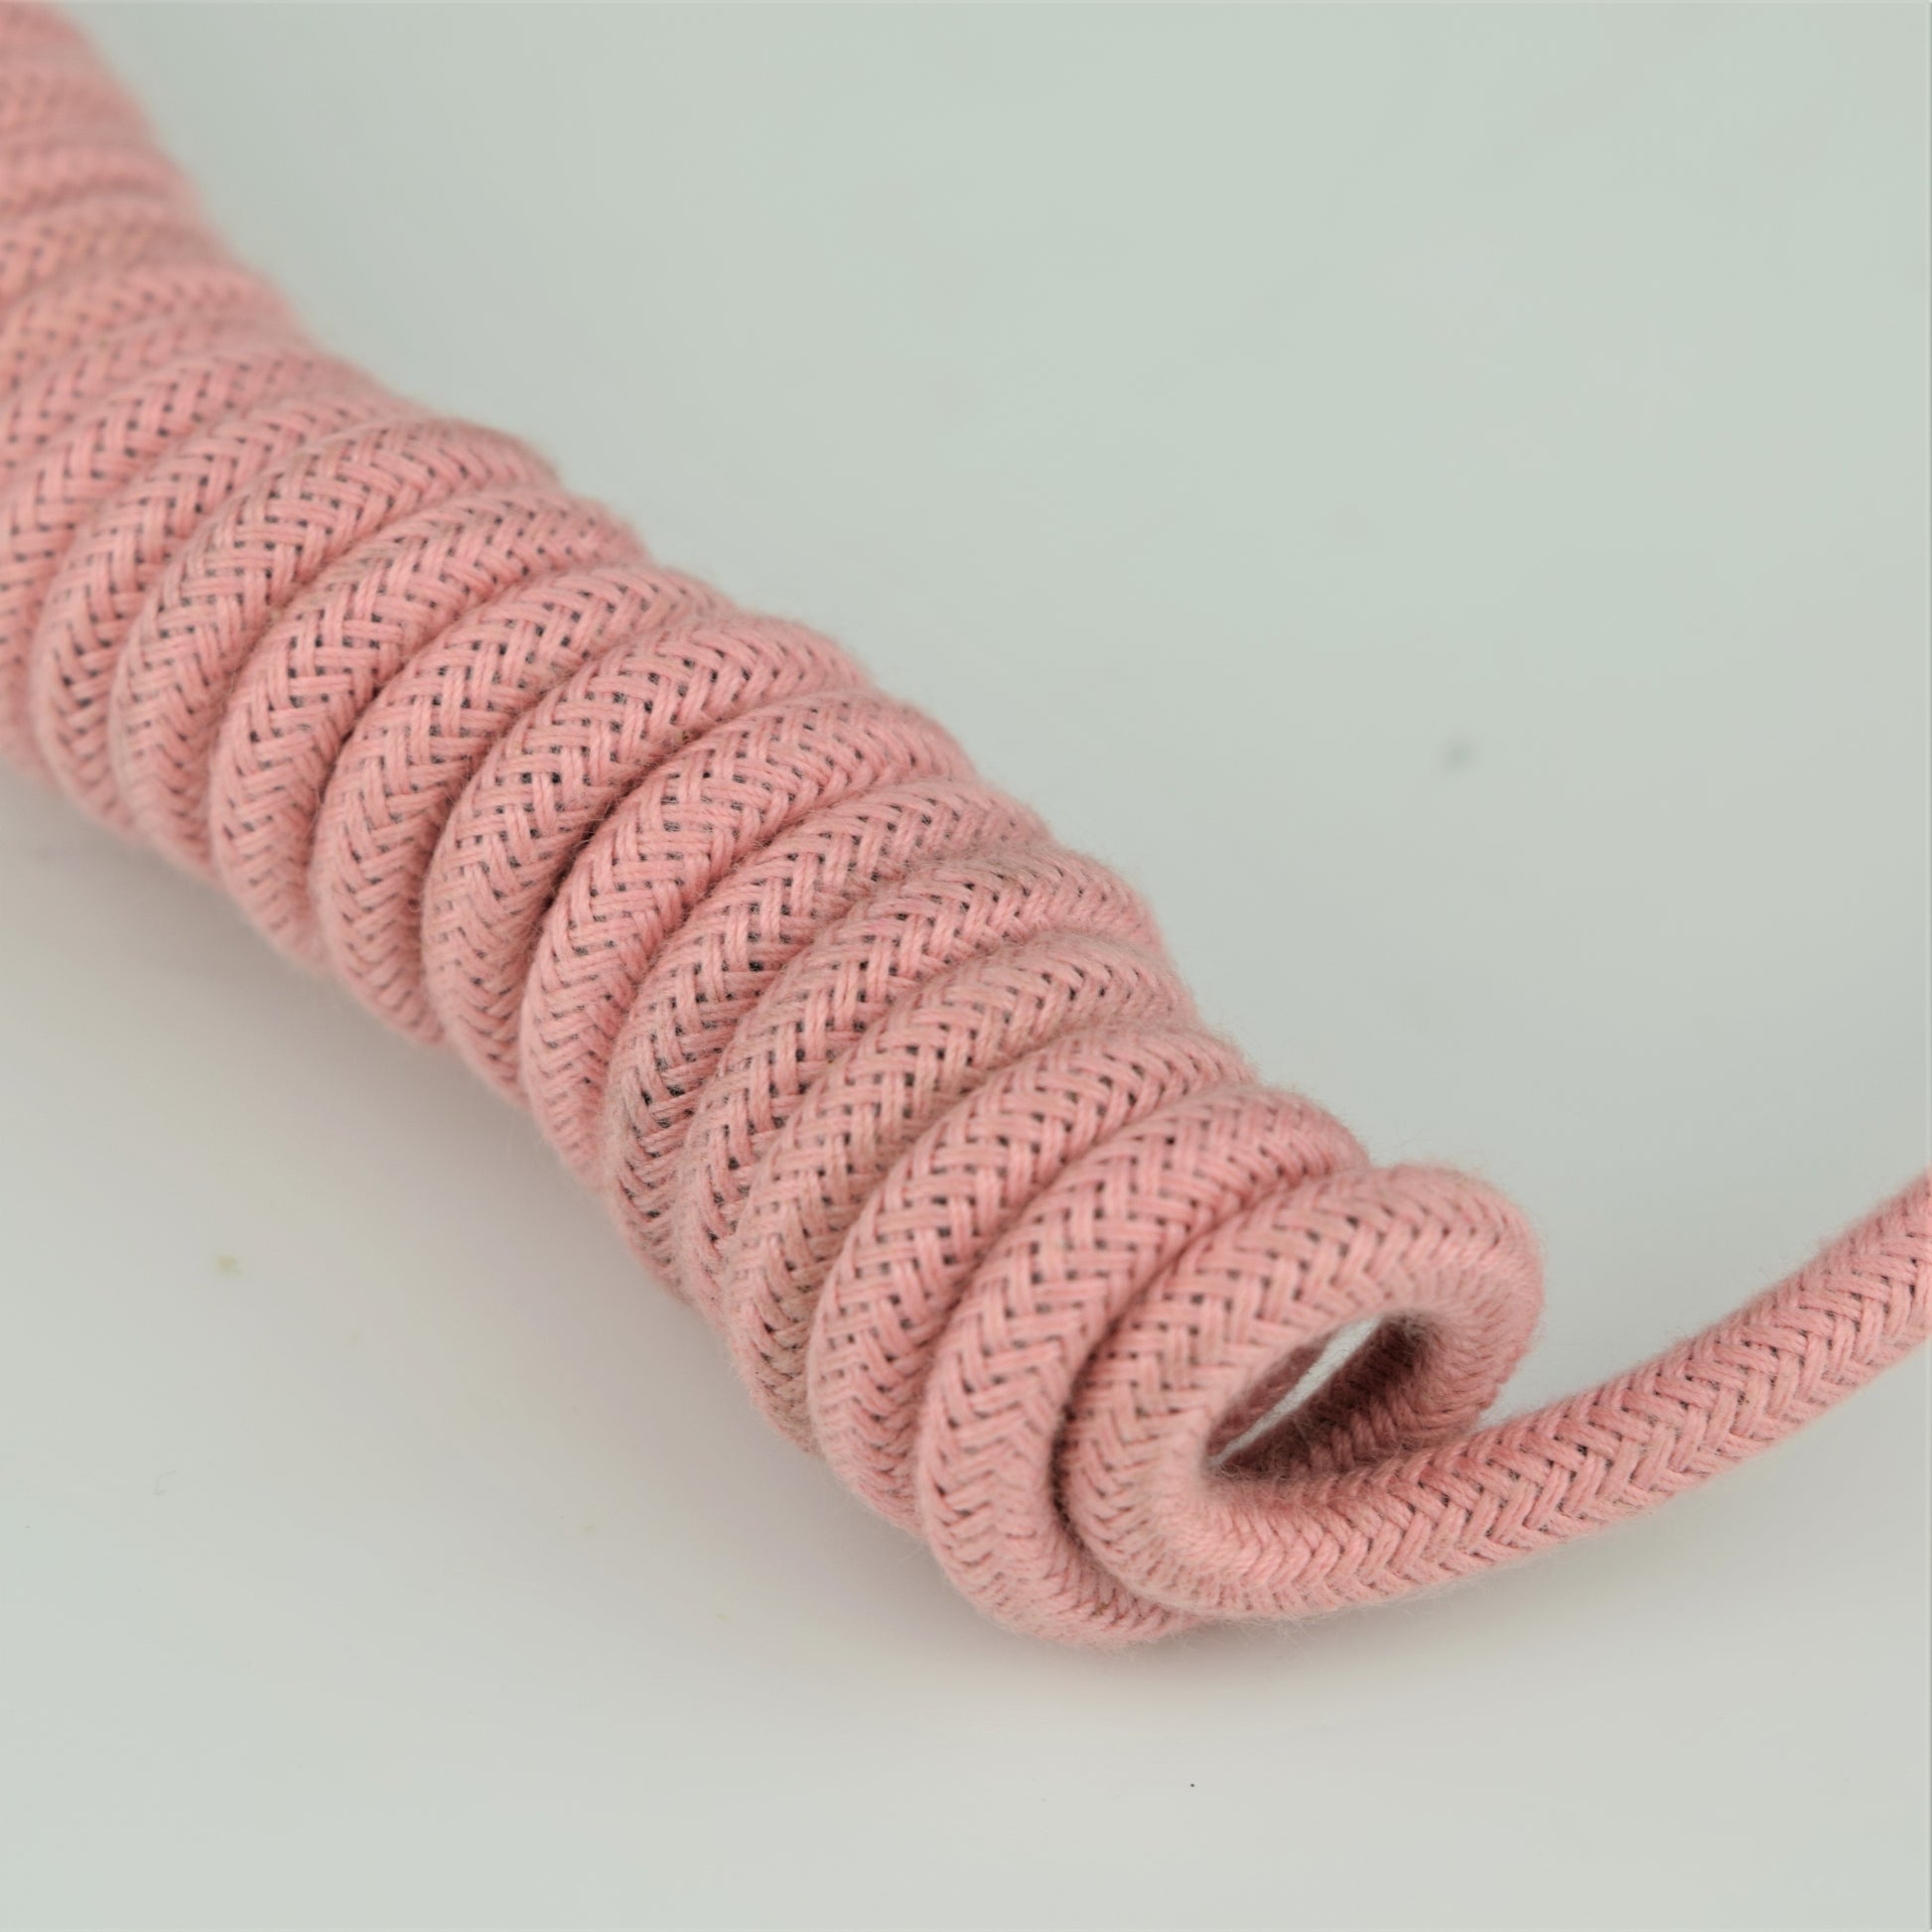 Cloth Covered Cord - Curly - Modular